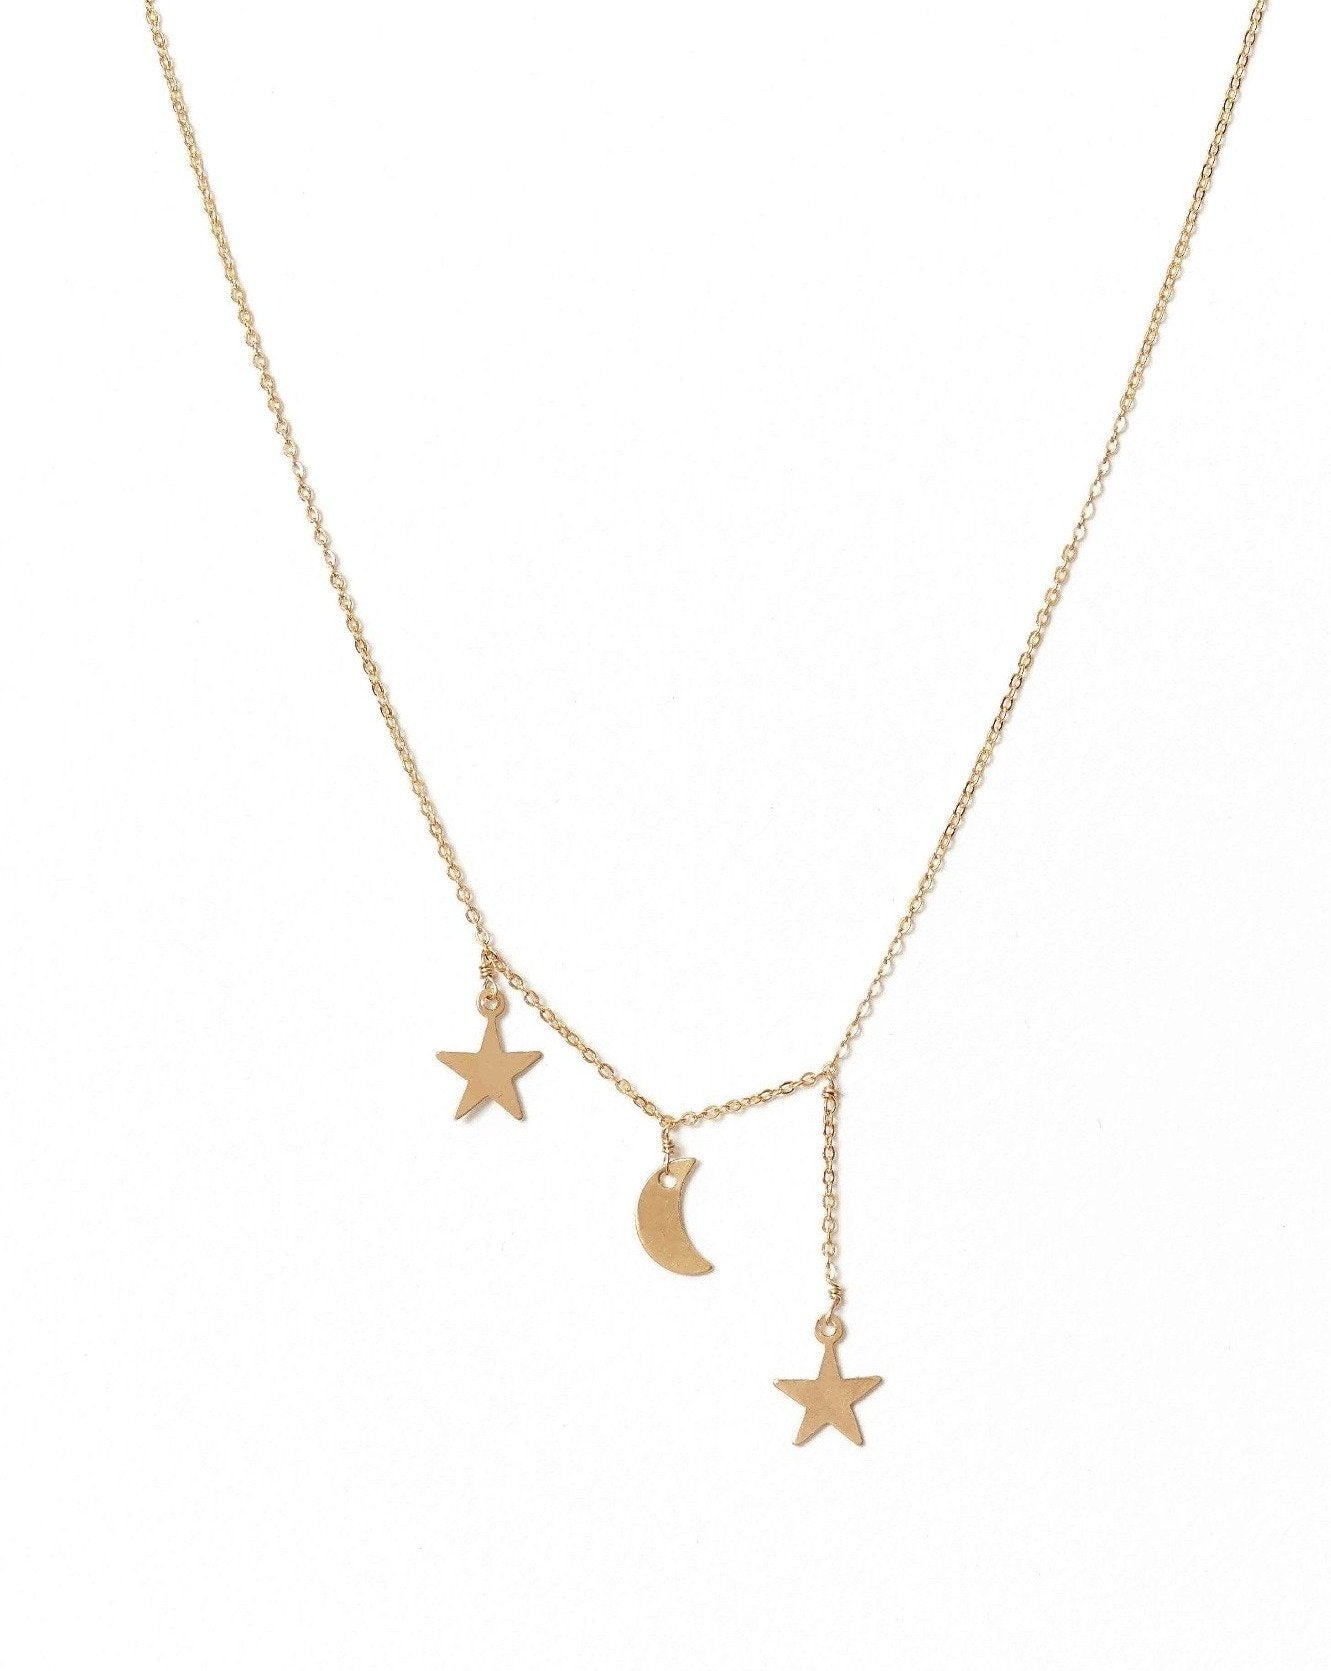 Filante Necklace by KOZAKH. A 16 to 18 inch adjustable length necklace in 14K Gold Filled, featuring moon and star charms with 1 star charm drop of about 0.5 inch. 